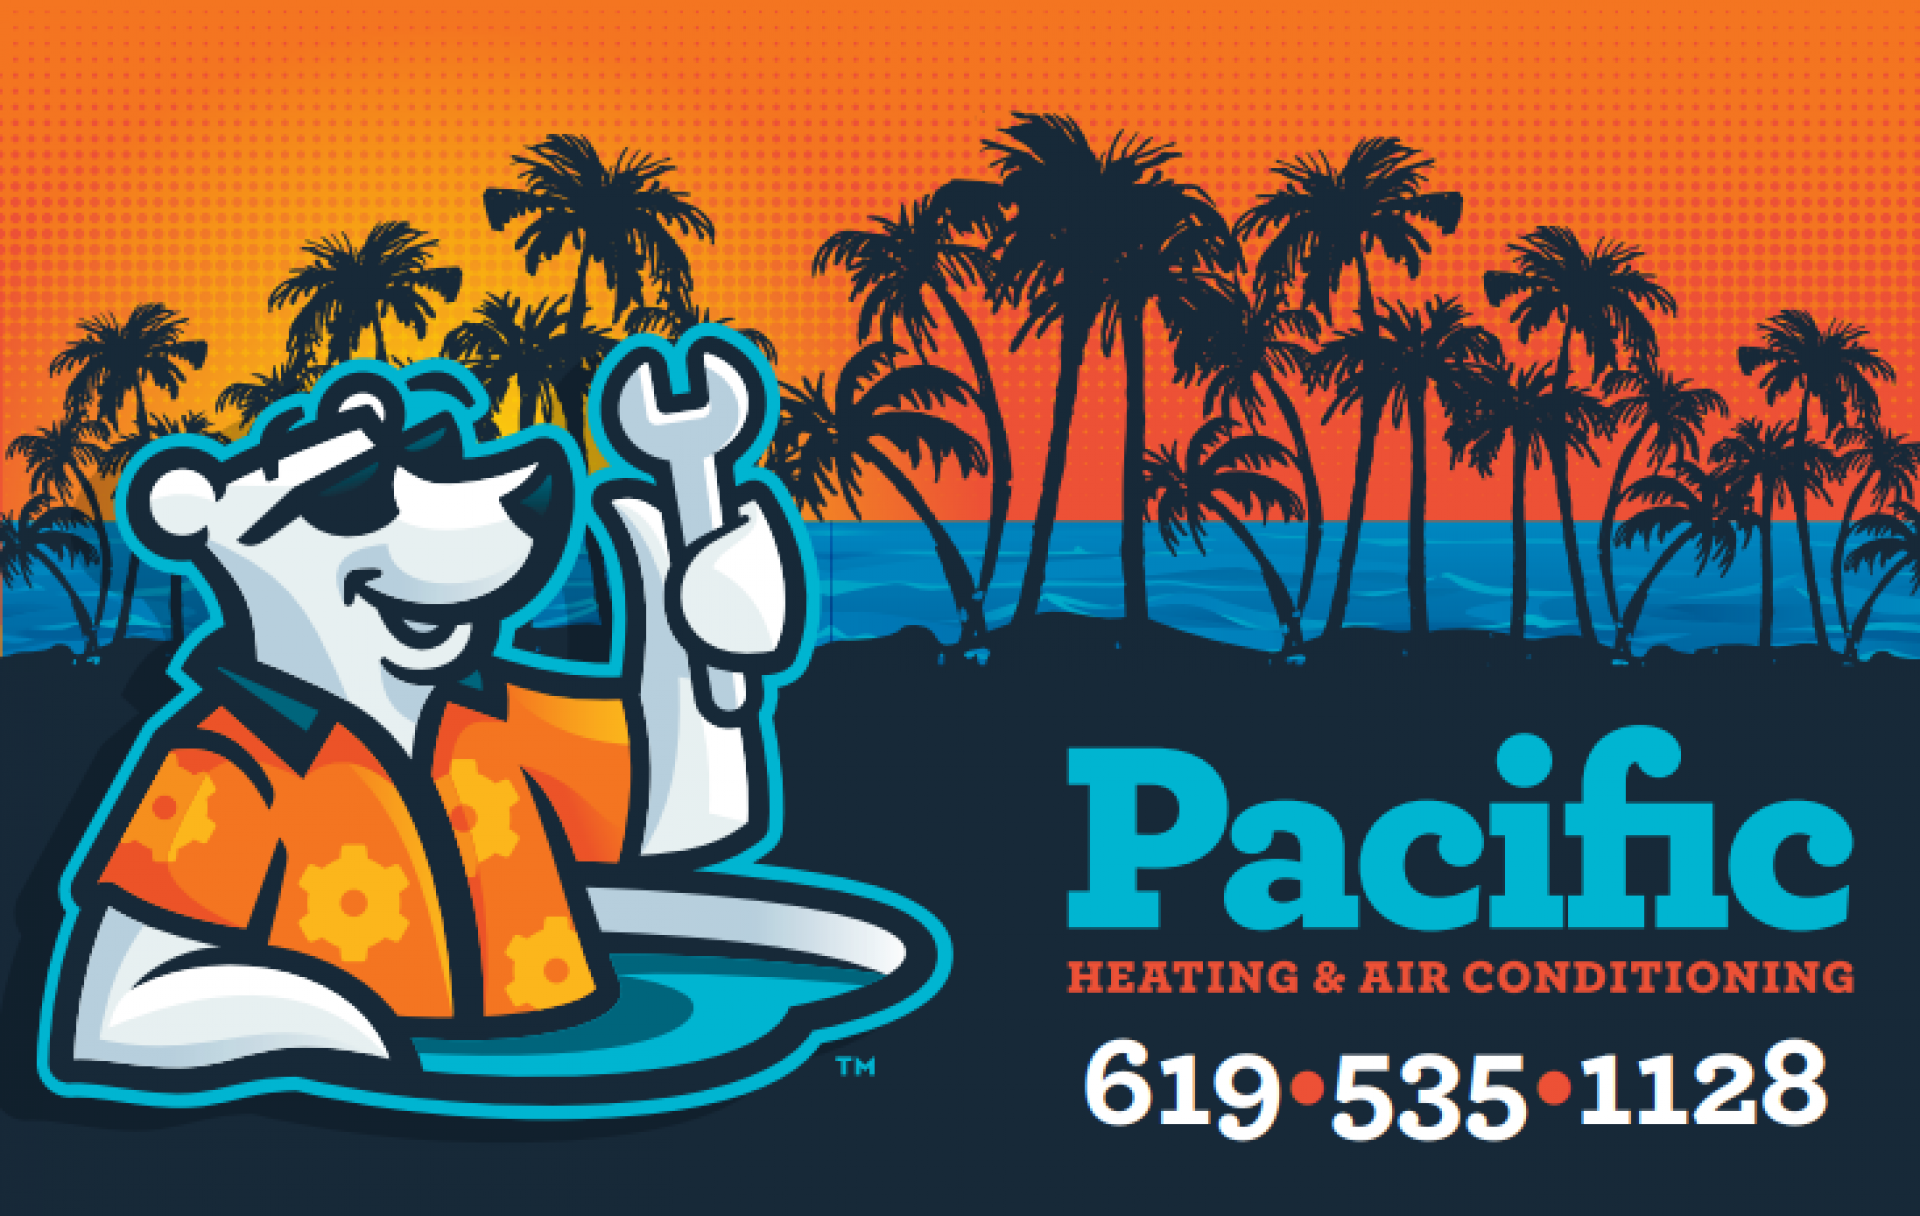 Pacific Heating and Air Conditioning, Inc company logo